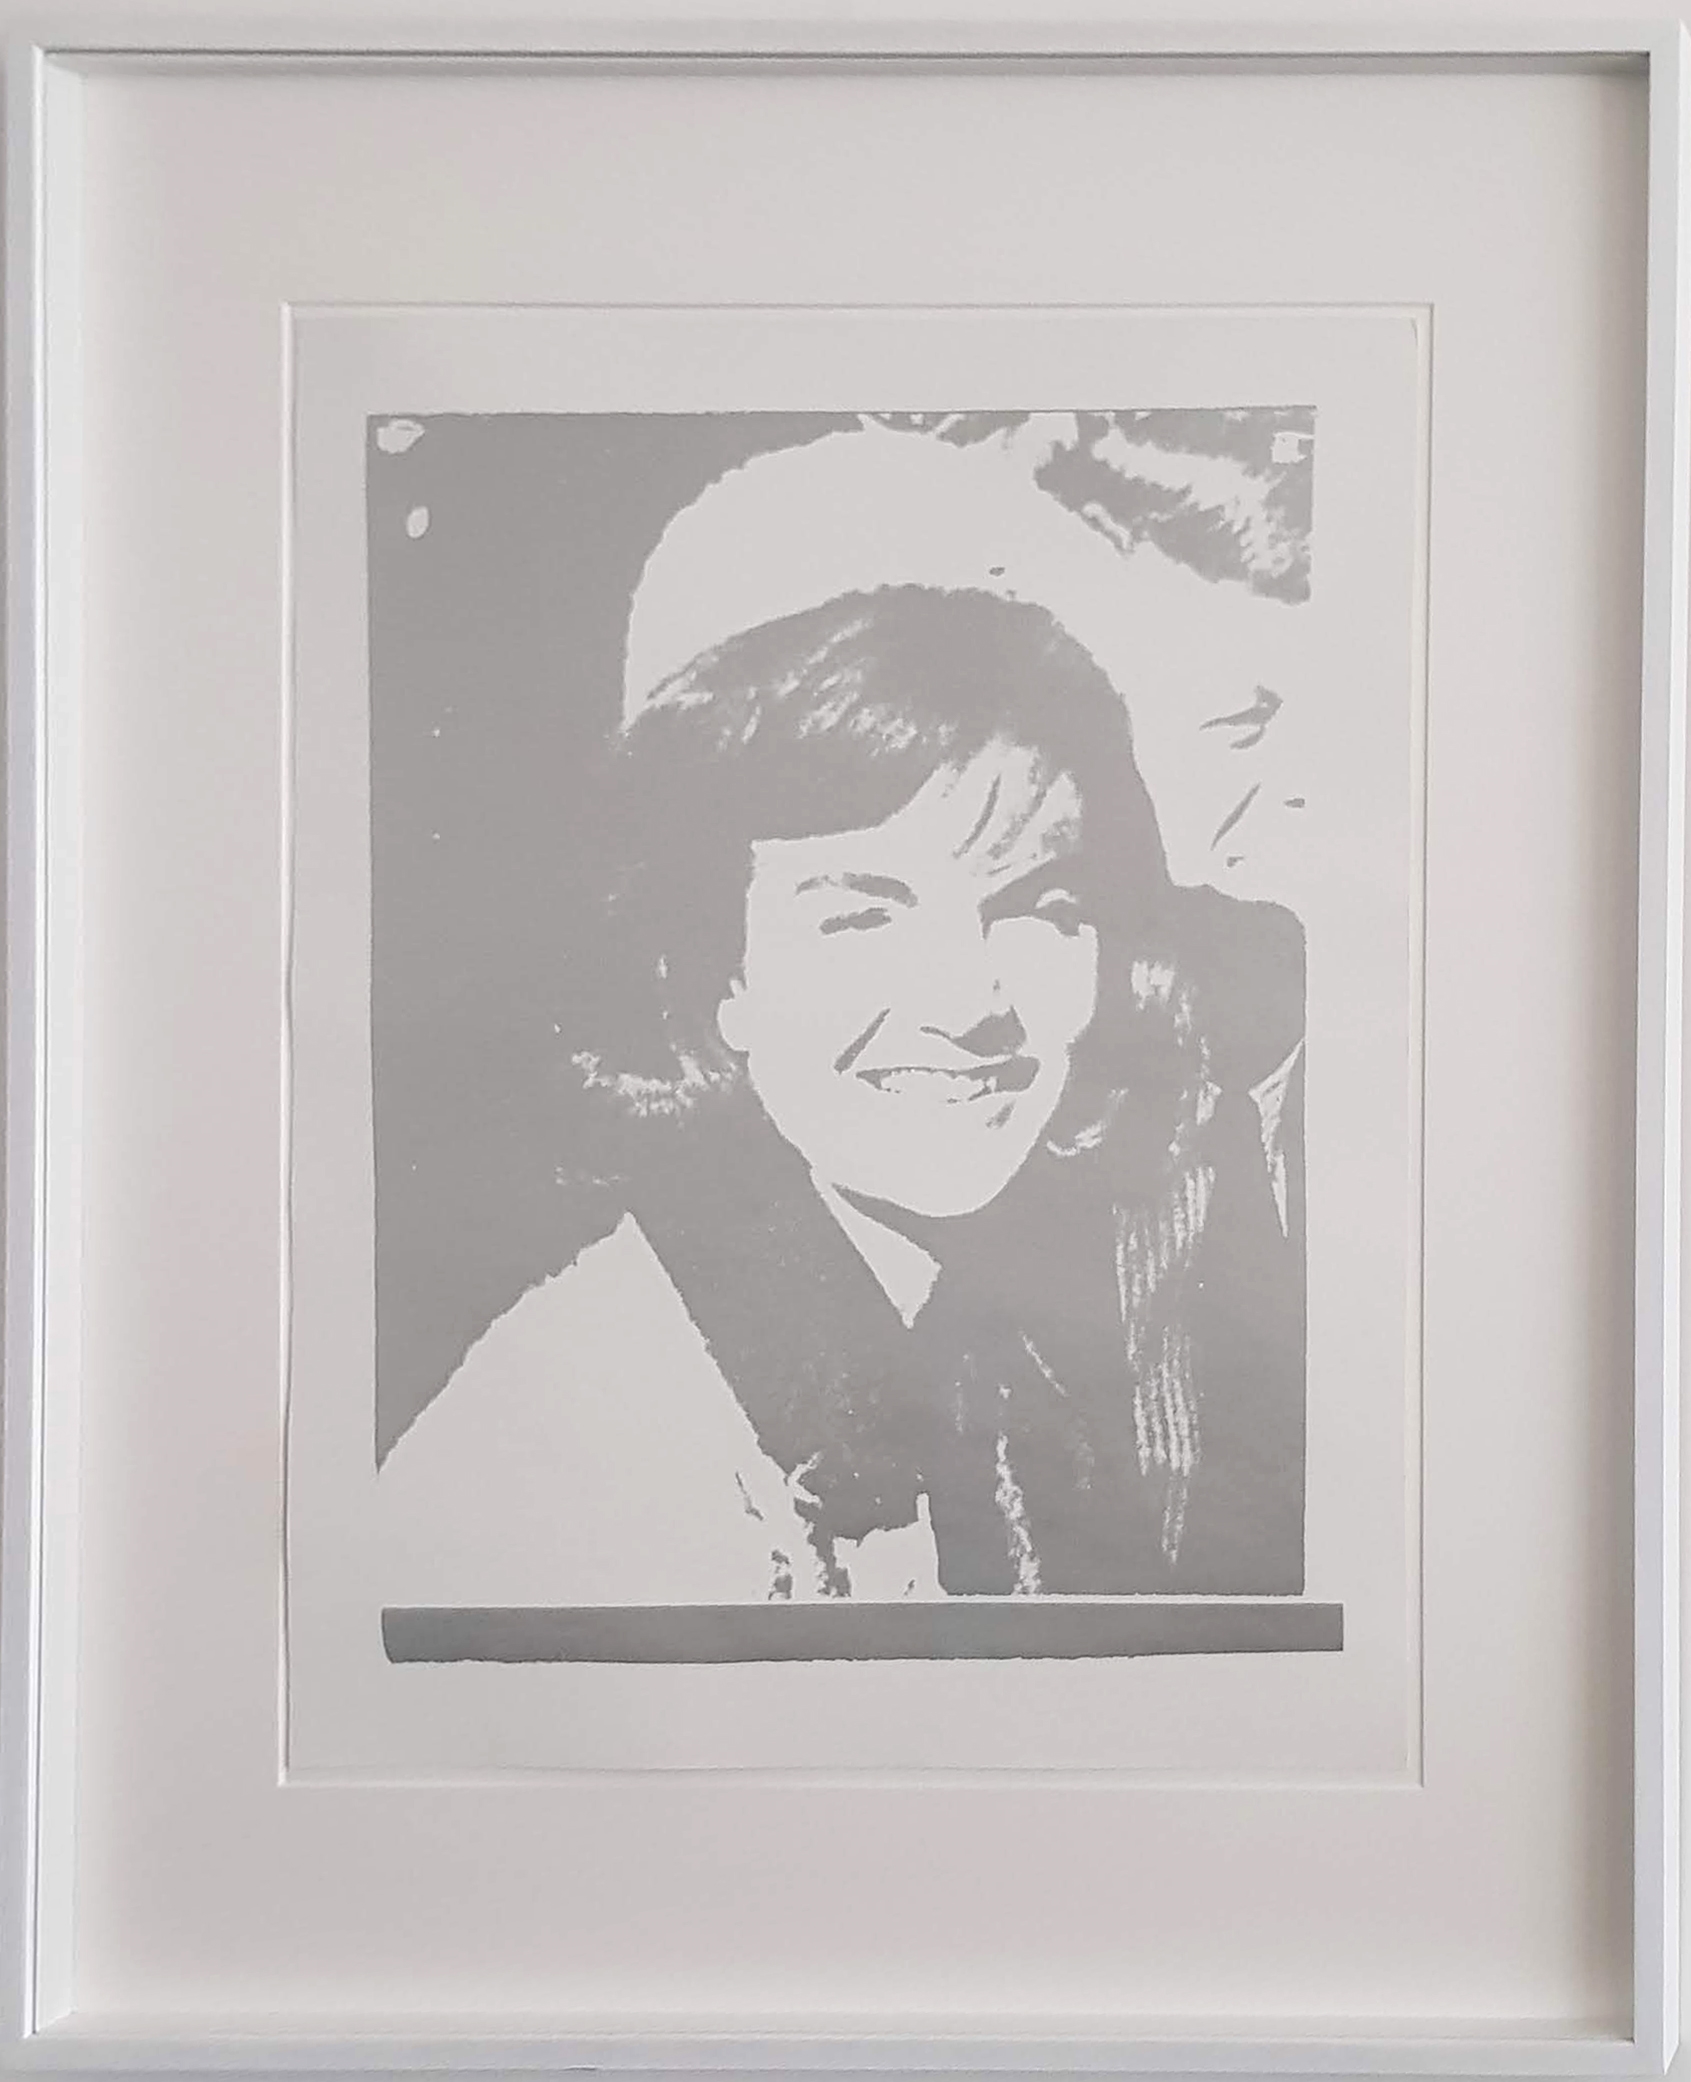 Jacqueline Kennedy I Jackie I From 11 Pop Artists I By Andy Warhol On Artnet Auctions 